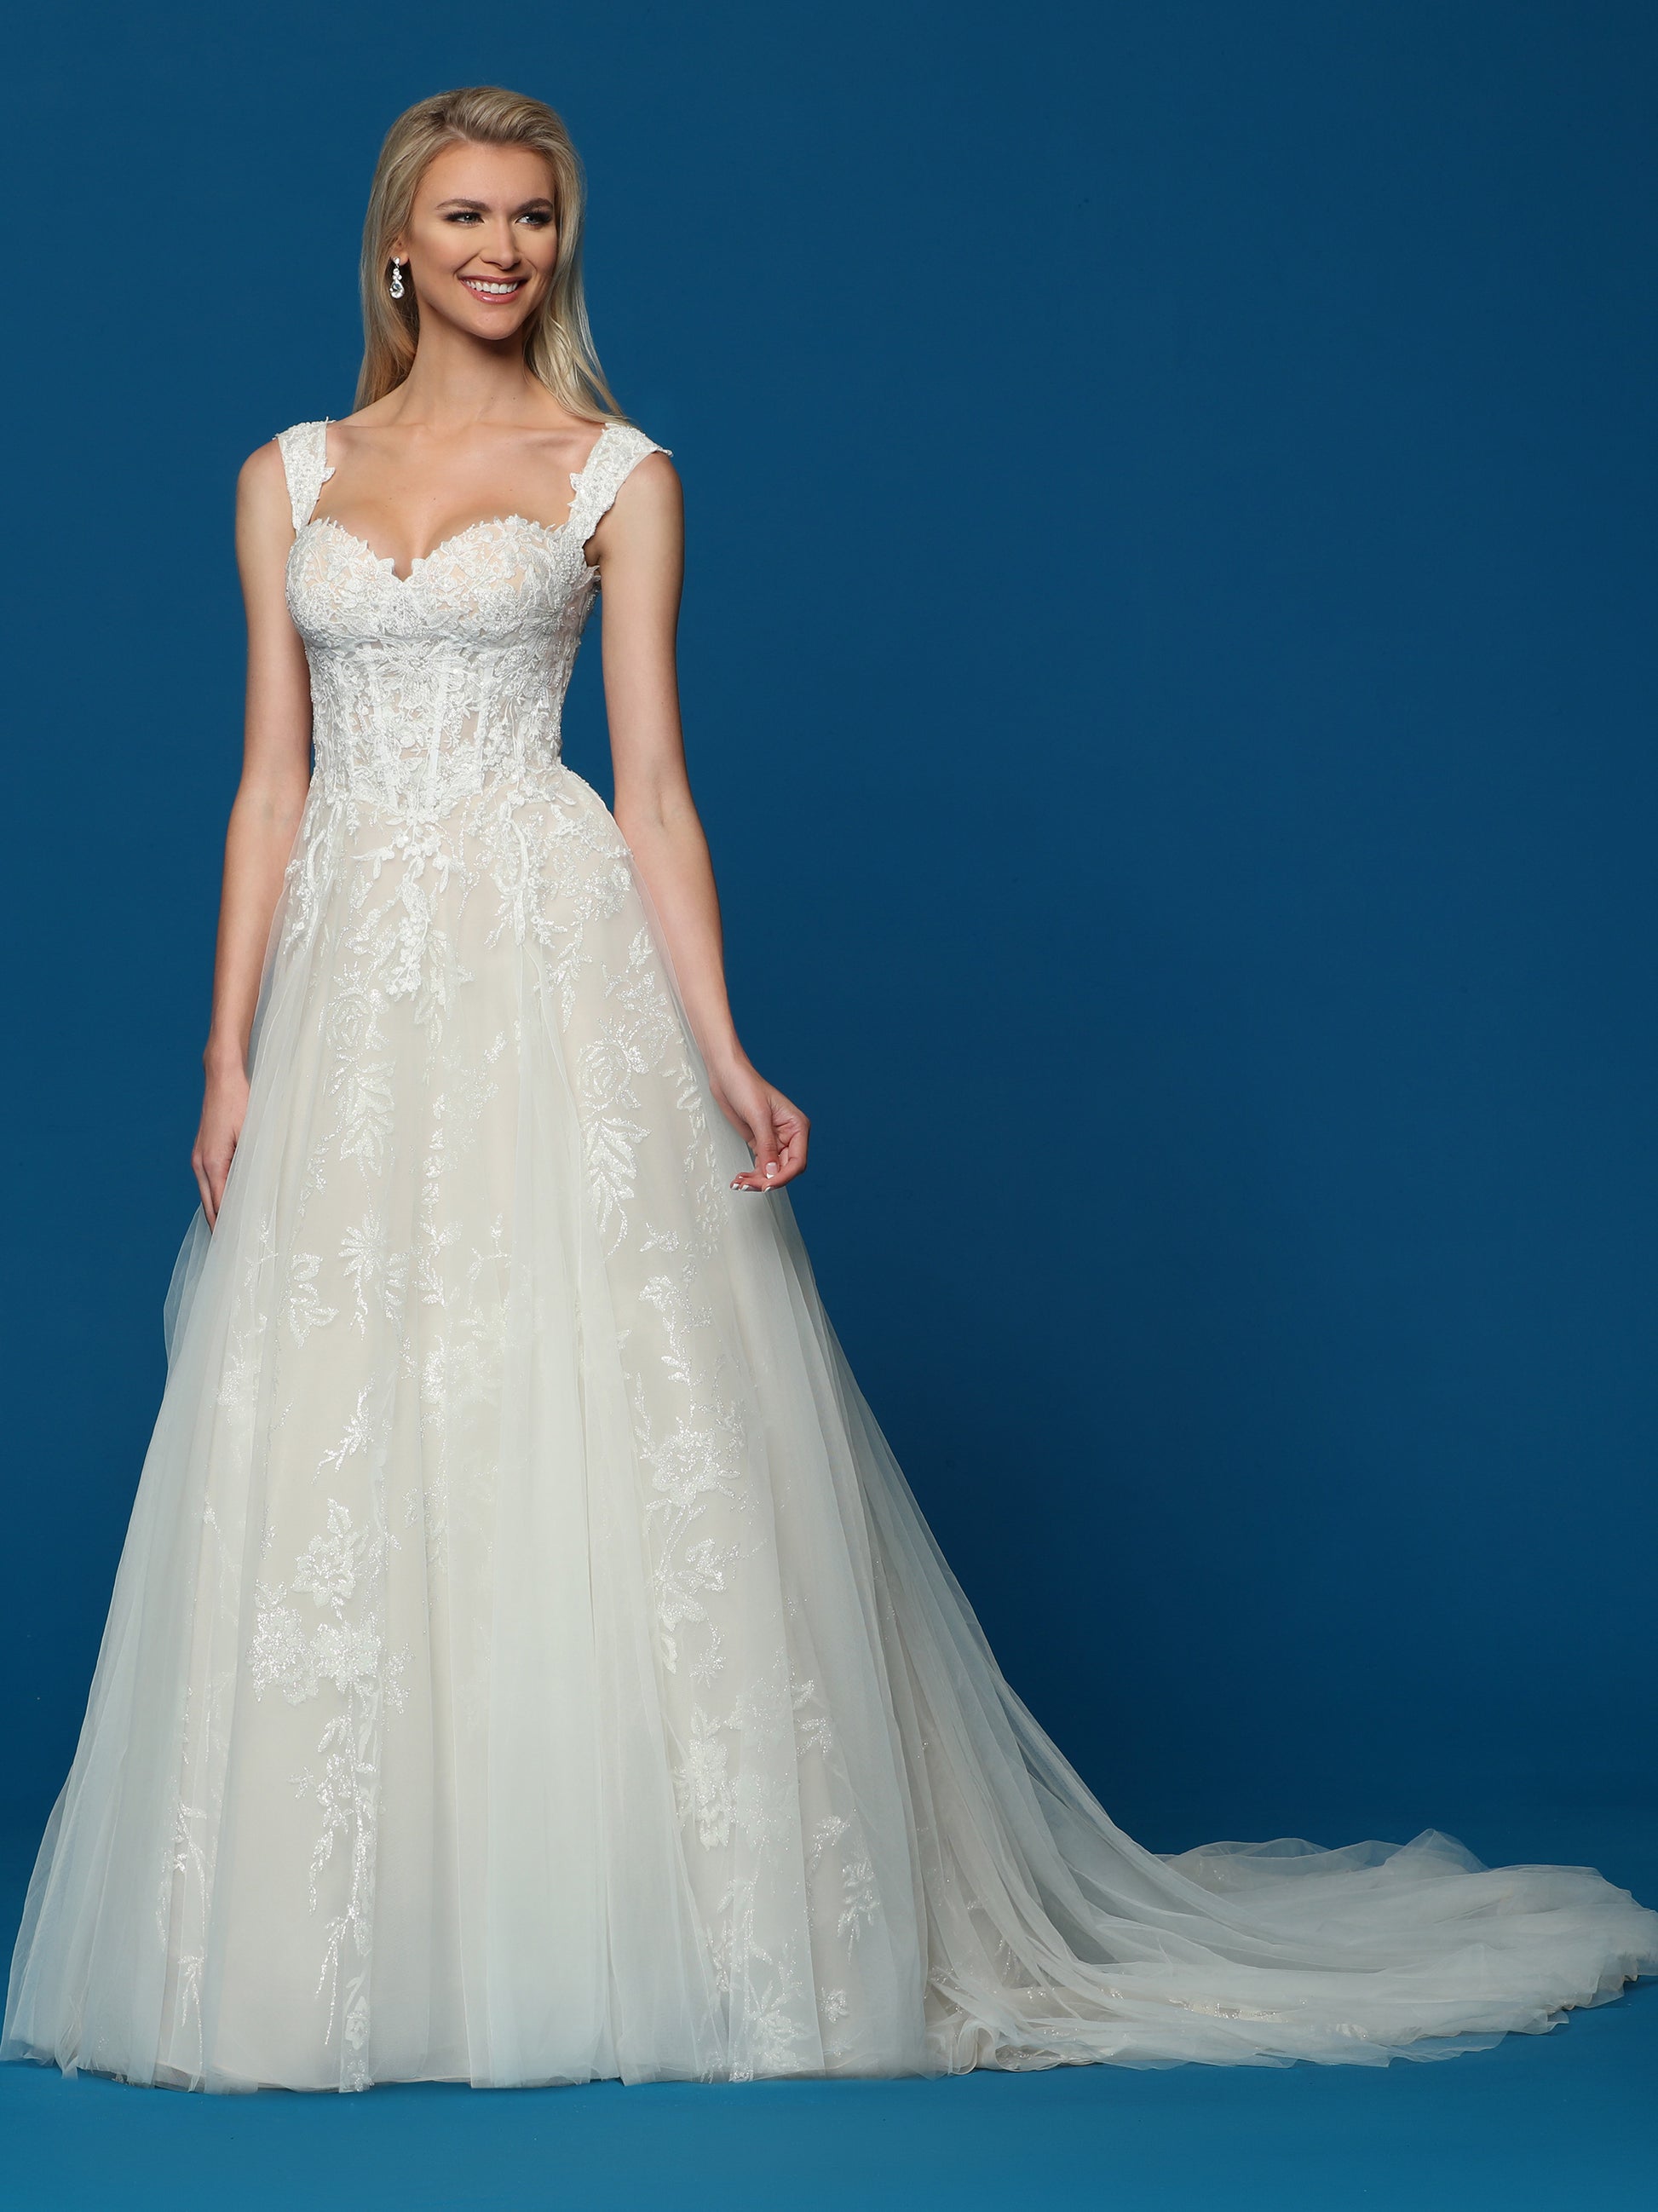 Davinci Bridal 50487 is a sweetheart neckline ballgown wedding dress Featuring an Embellished lace bodice cascading into the lush skirt with lace trailing down the A line skirt.  Available for 1-2 Week Delivery!!!